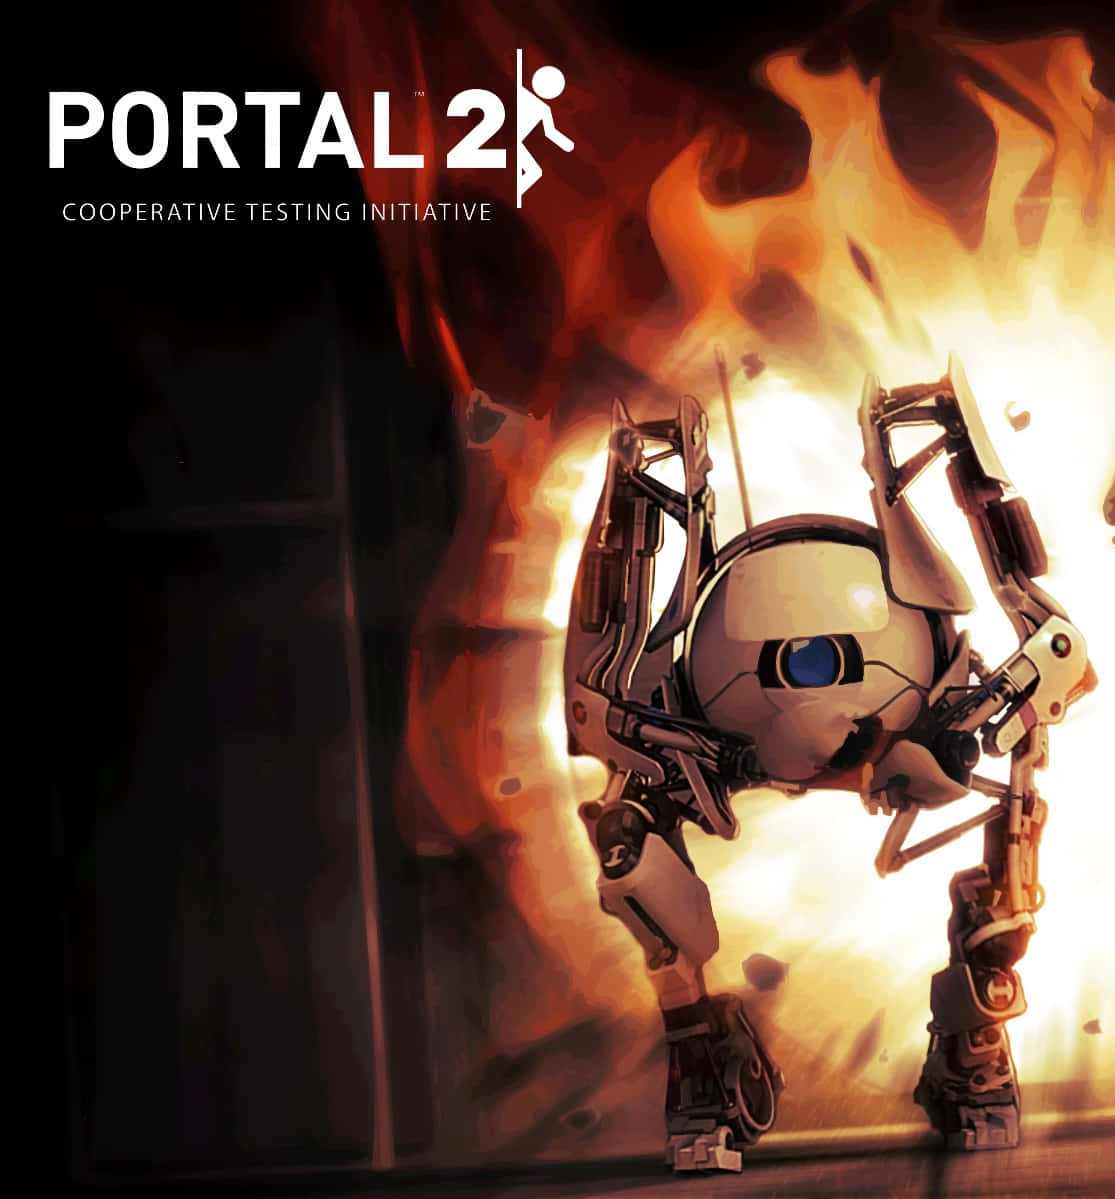 Challenge Yourself in the Pixel 3 Portal 2